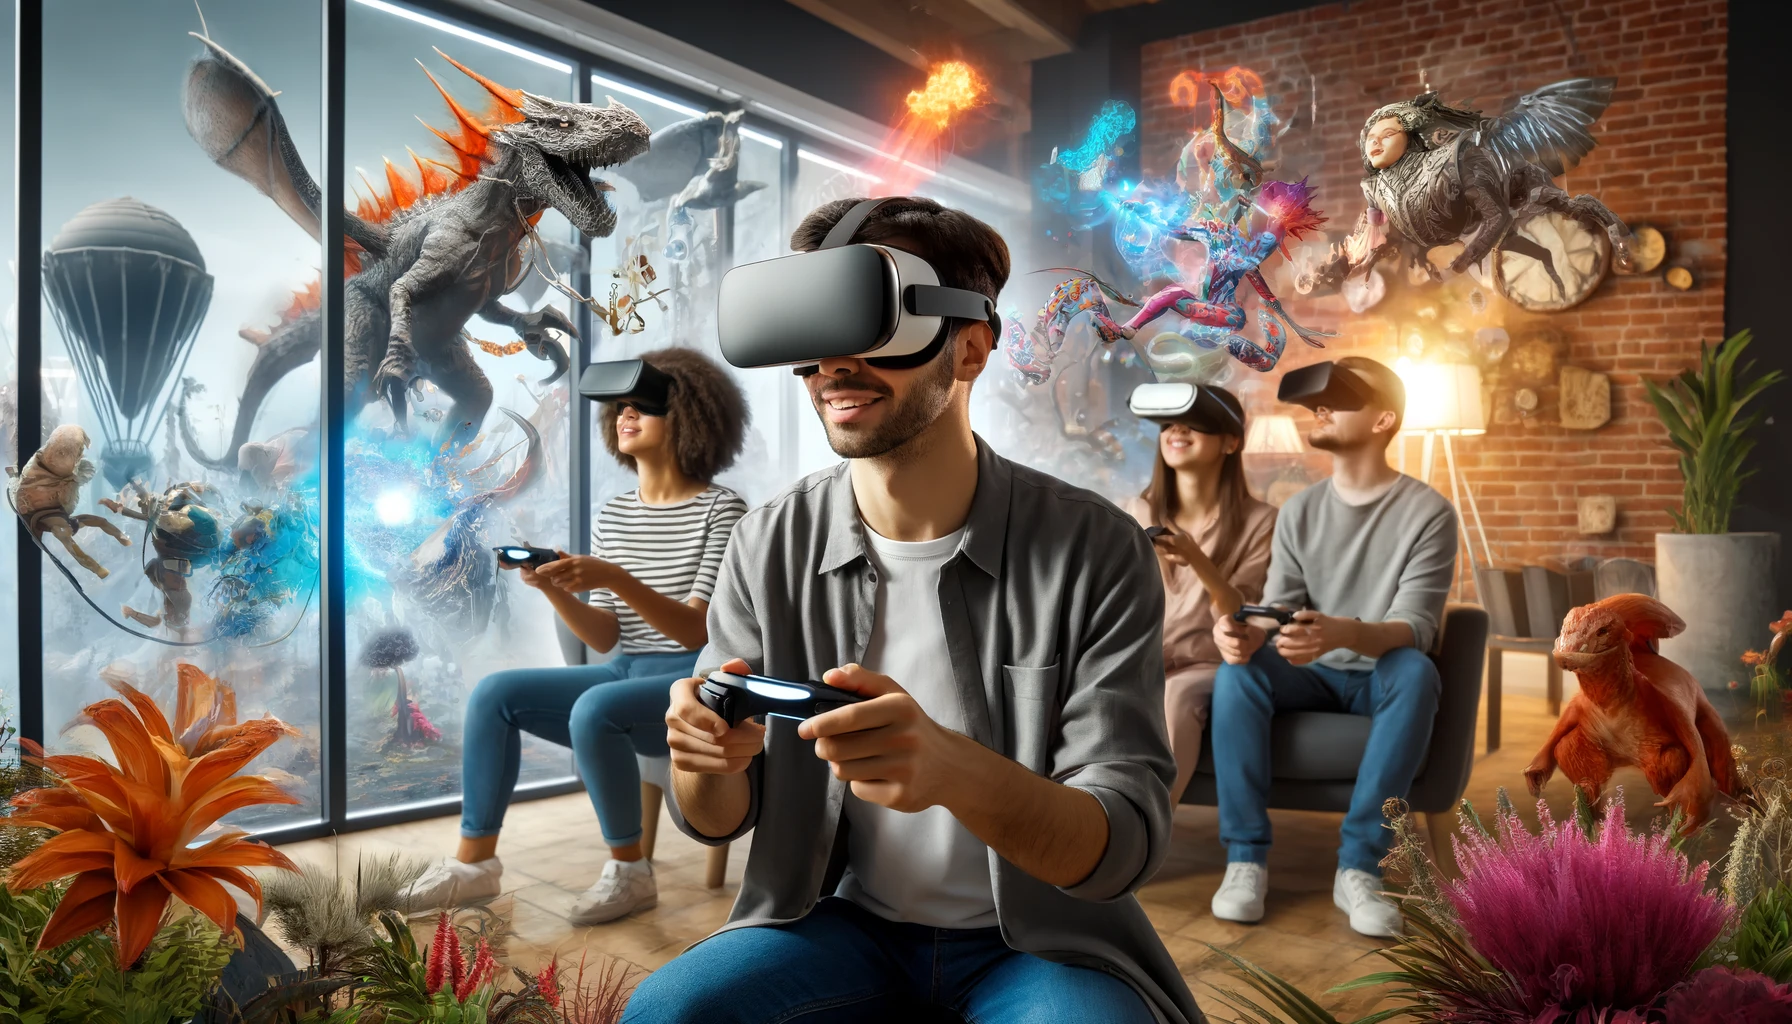 Users enjoying a virtual reality game in a modern living room. The image shows several young people of various ethnicities wearing VR headsets, surrounded by virtual elements such as fantastic creatures and exotic landscapes, integrated into the physical space through 3D mesh effects.